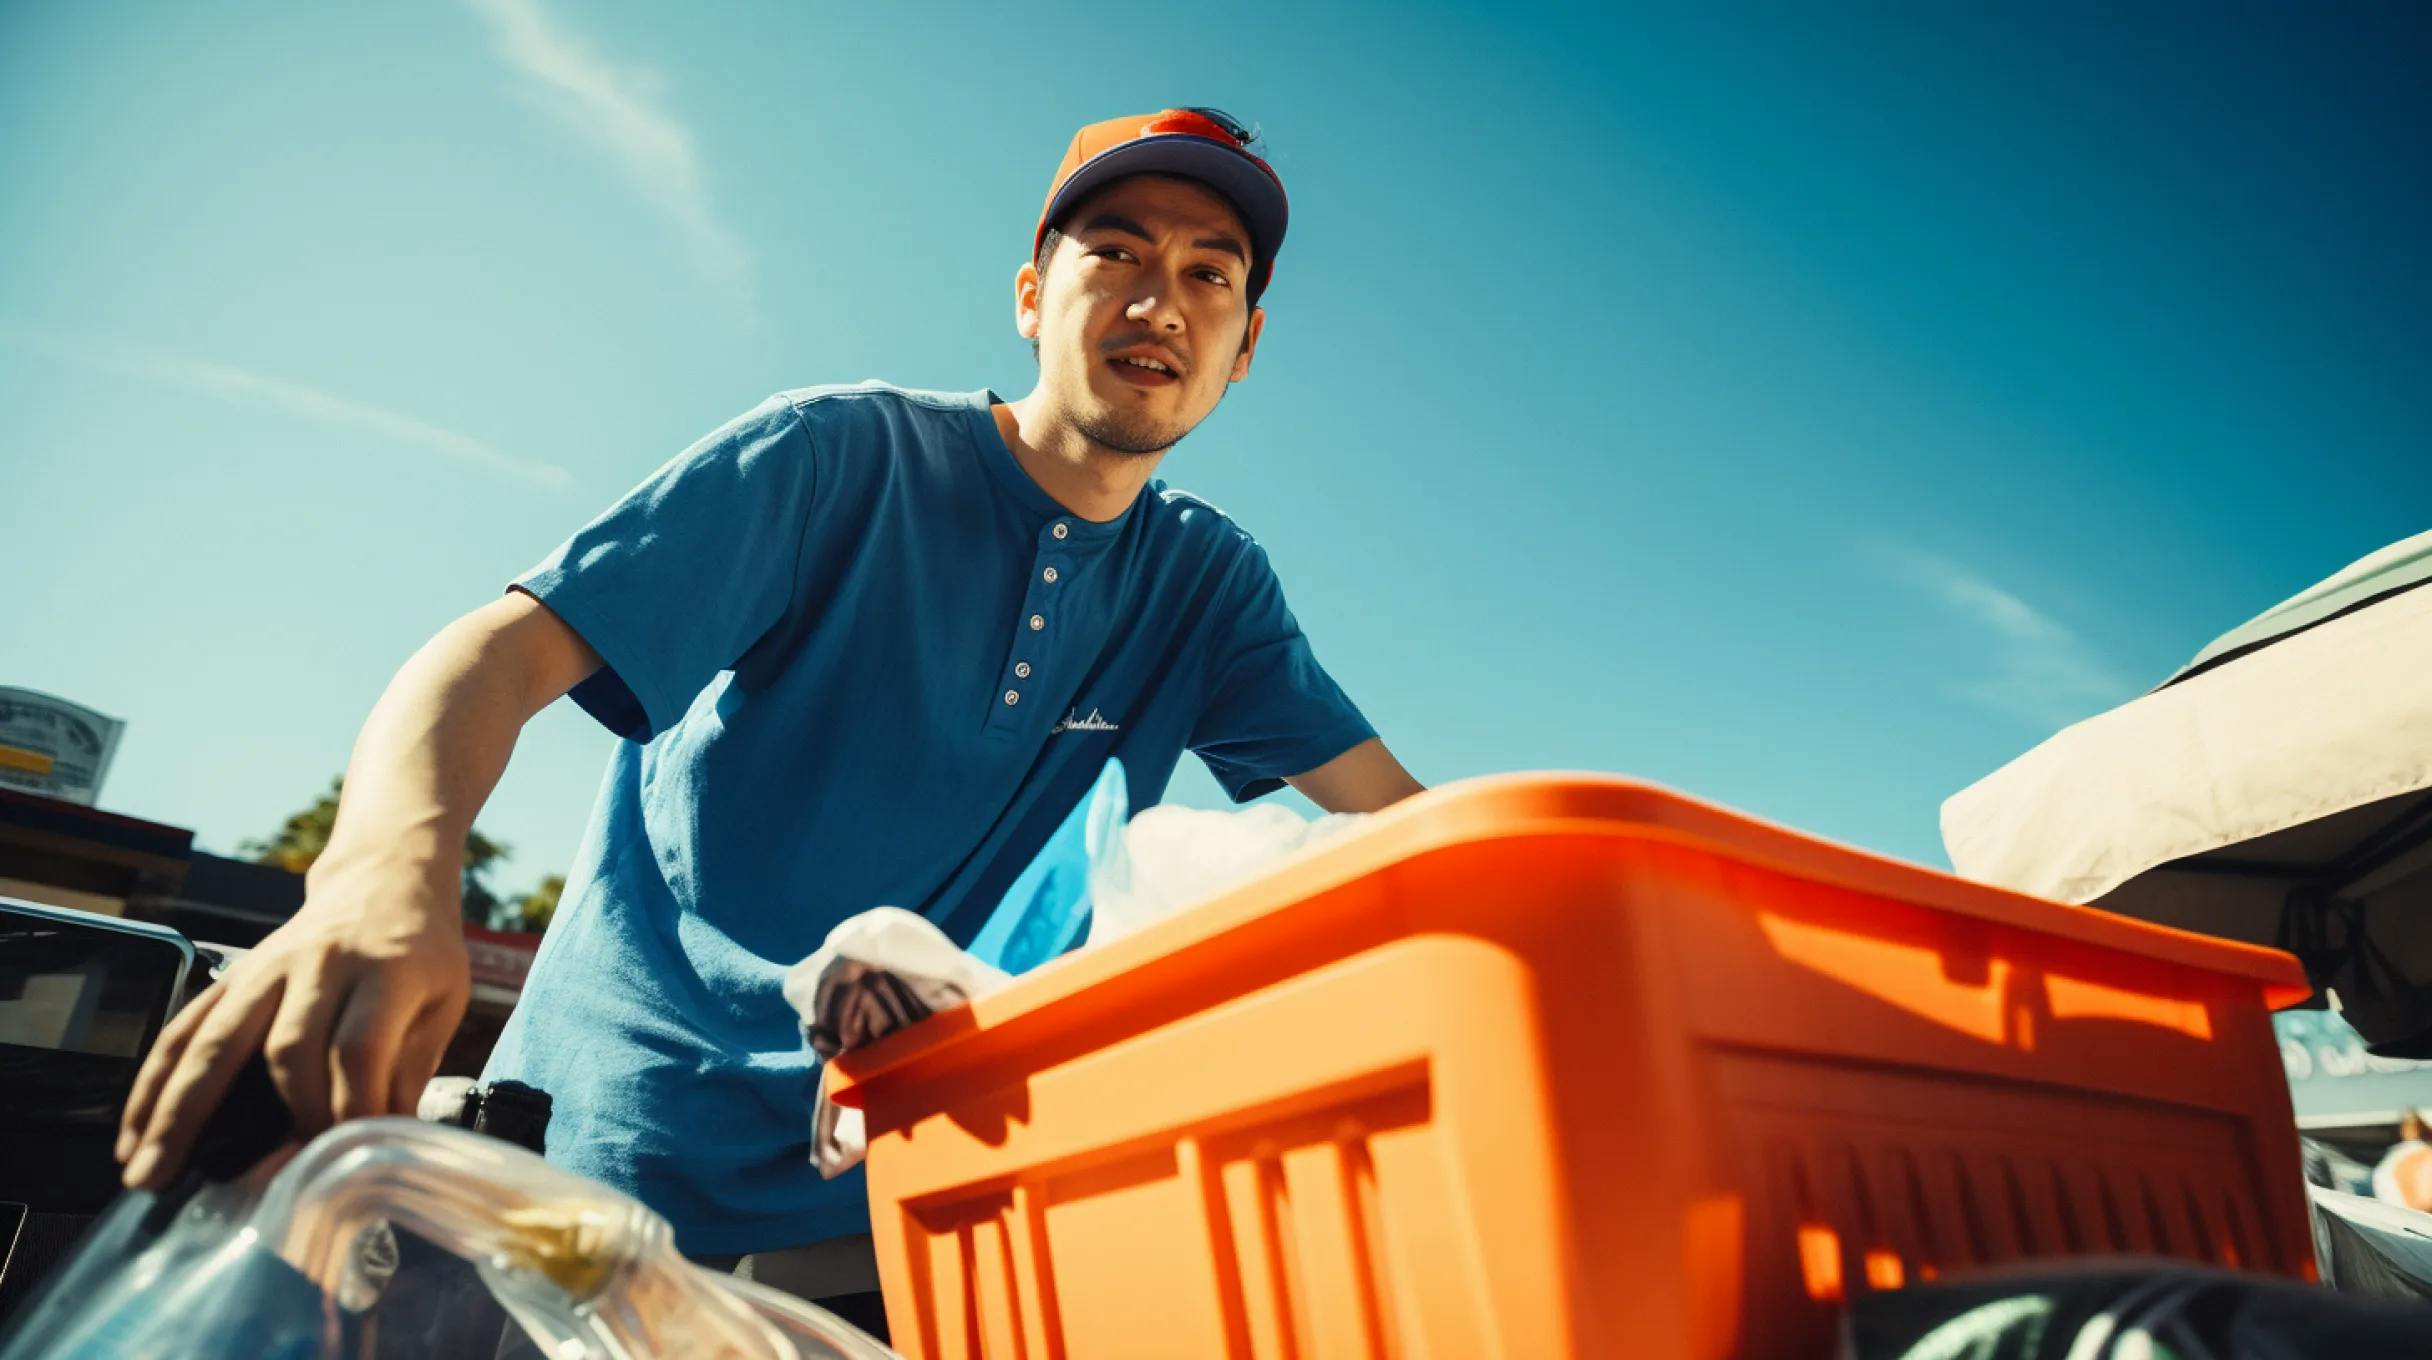 A man in a blue shirt and hat holding a plastic container.